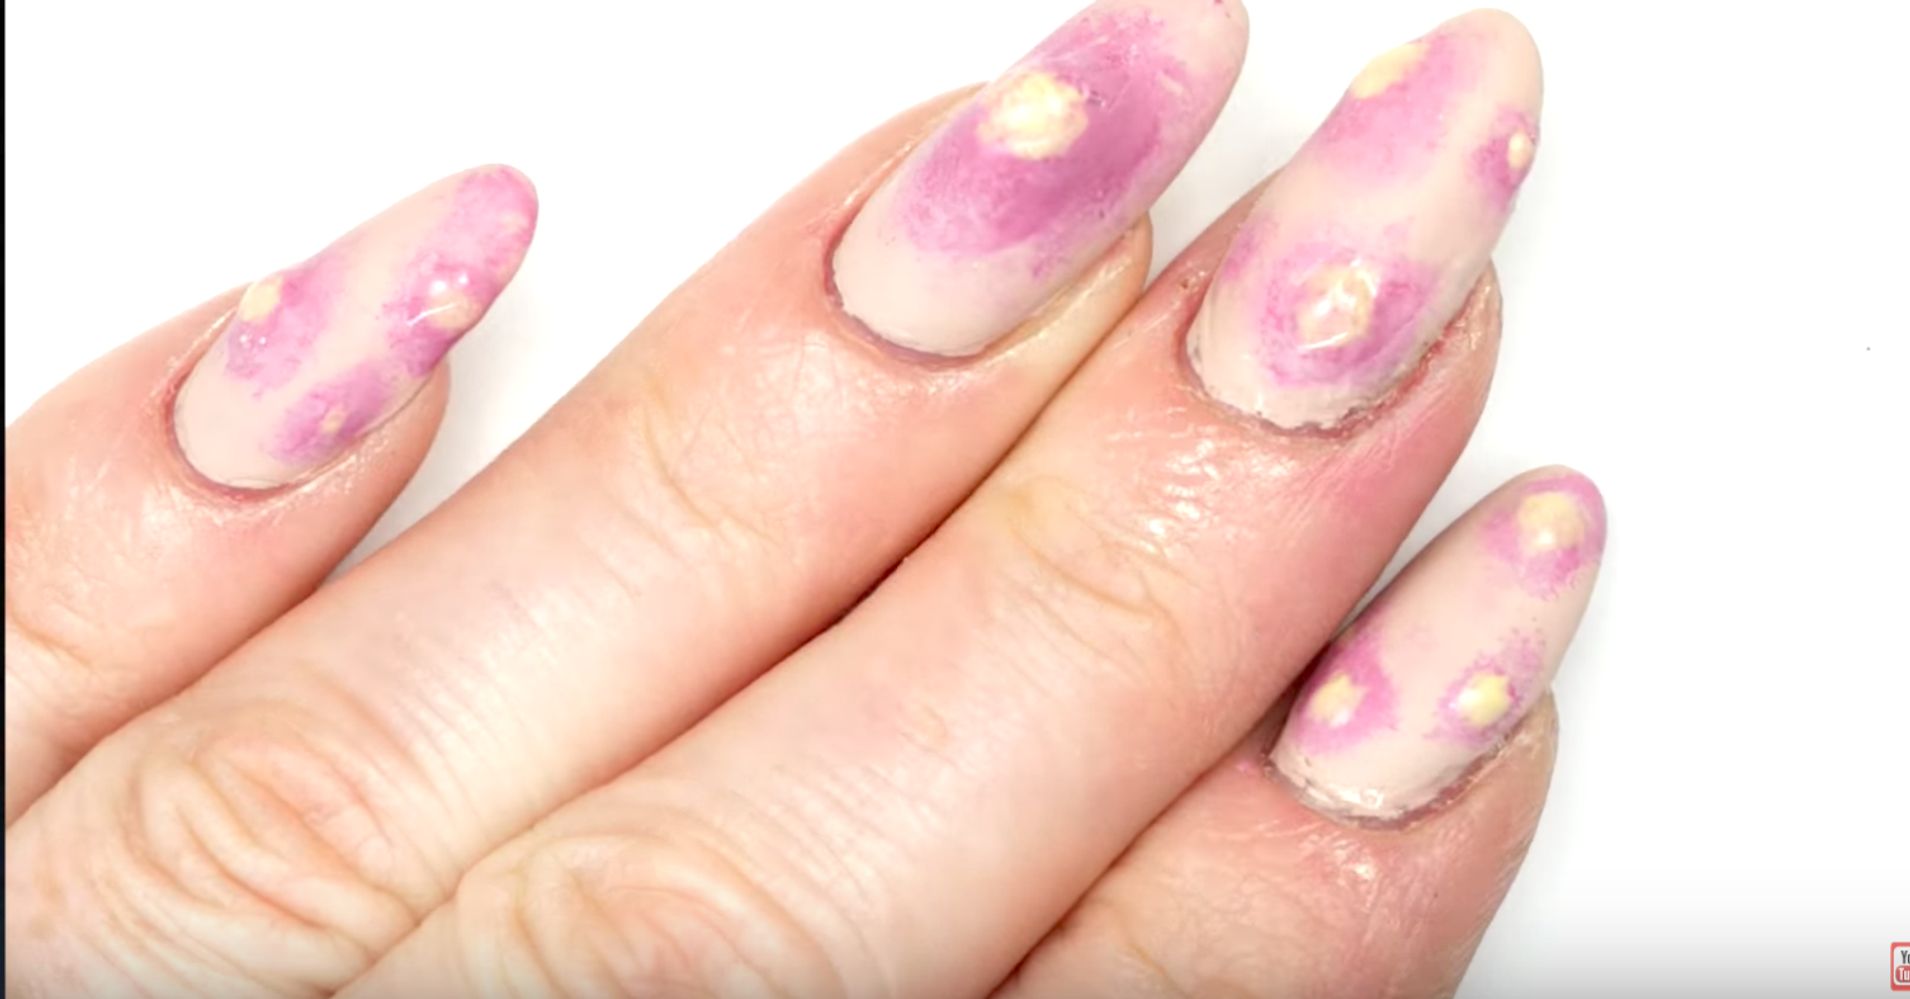 2. "The Most Disturbing Nail Art Trends That Will Make You Cringe" - wide 2